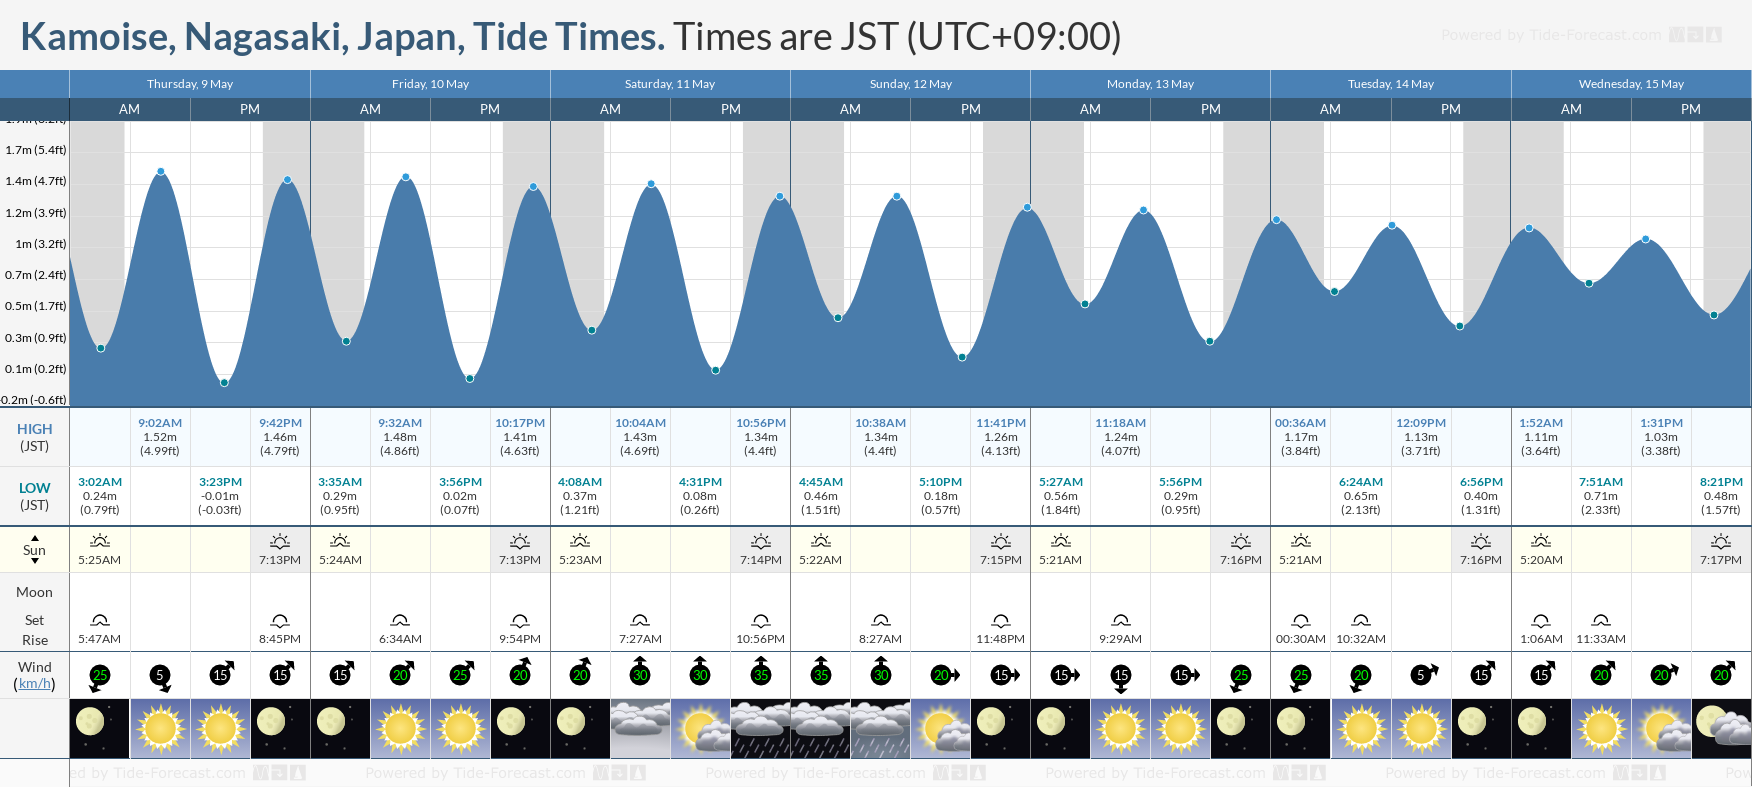 Kamoise, Nagasaki, Japan Tide Chart including high and low tide tide times for the next 7 days